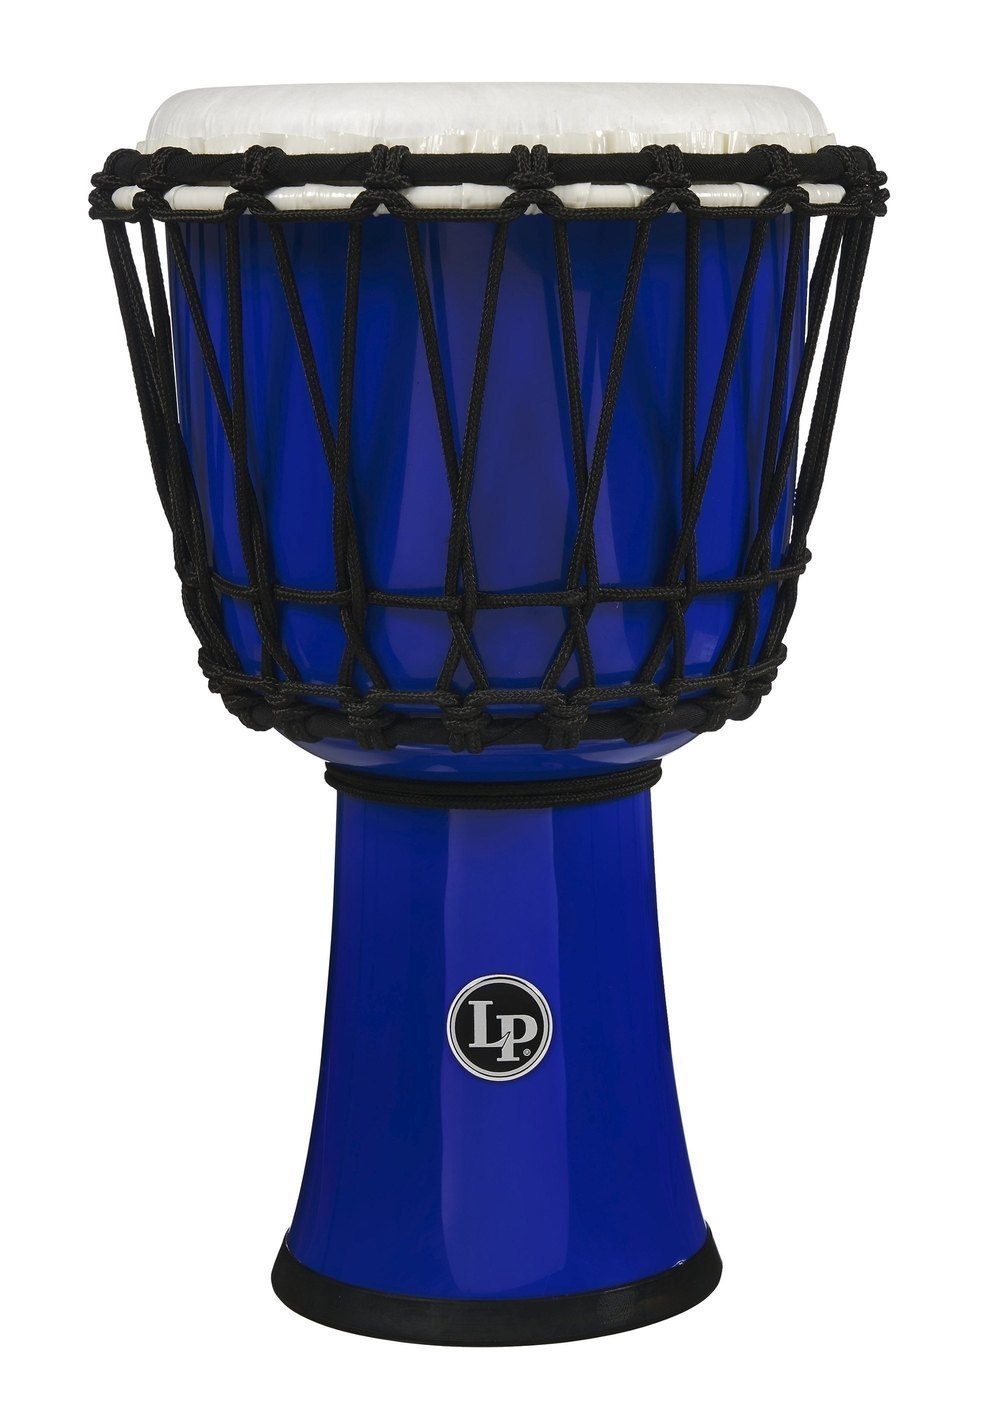 LP LATIN PERCUSSION LP1607BL DJEMBE WORLD 7-INCH ROPE TUNED CIRCLE BLUE